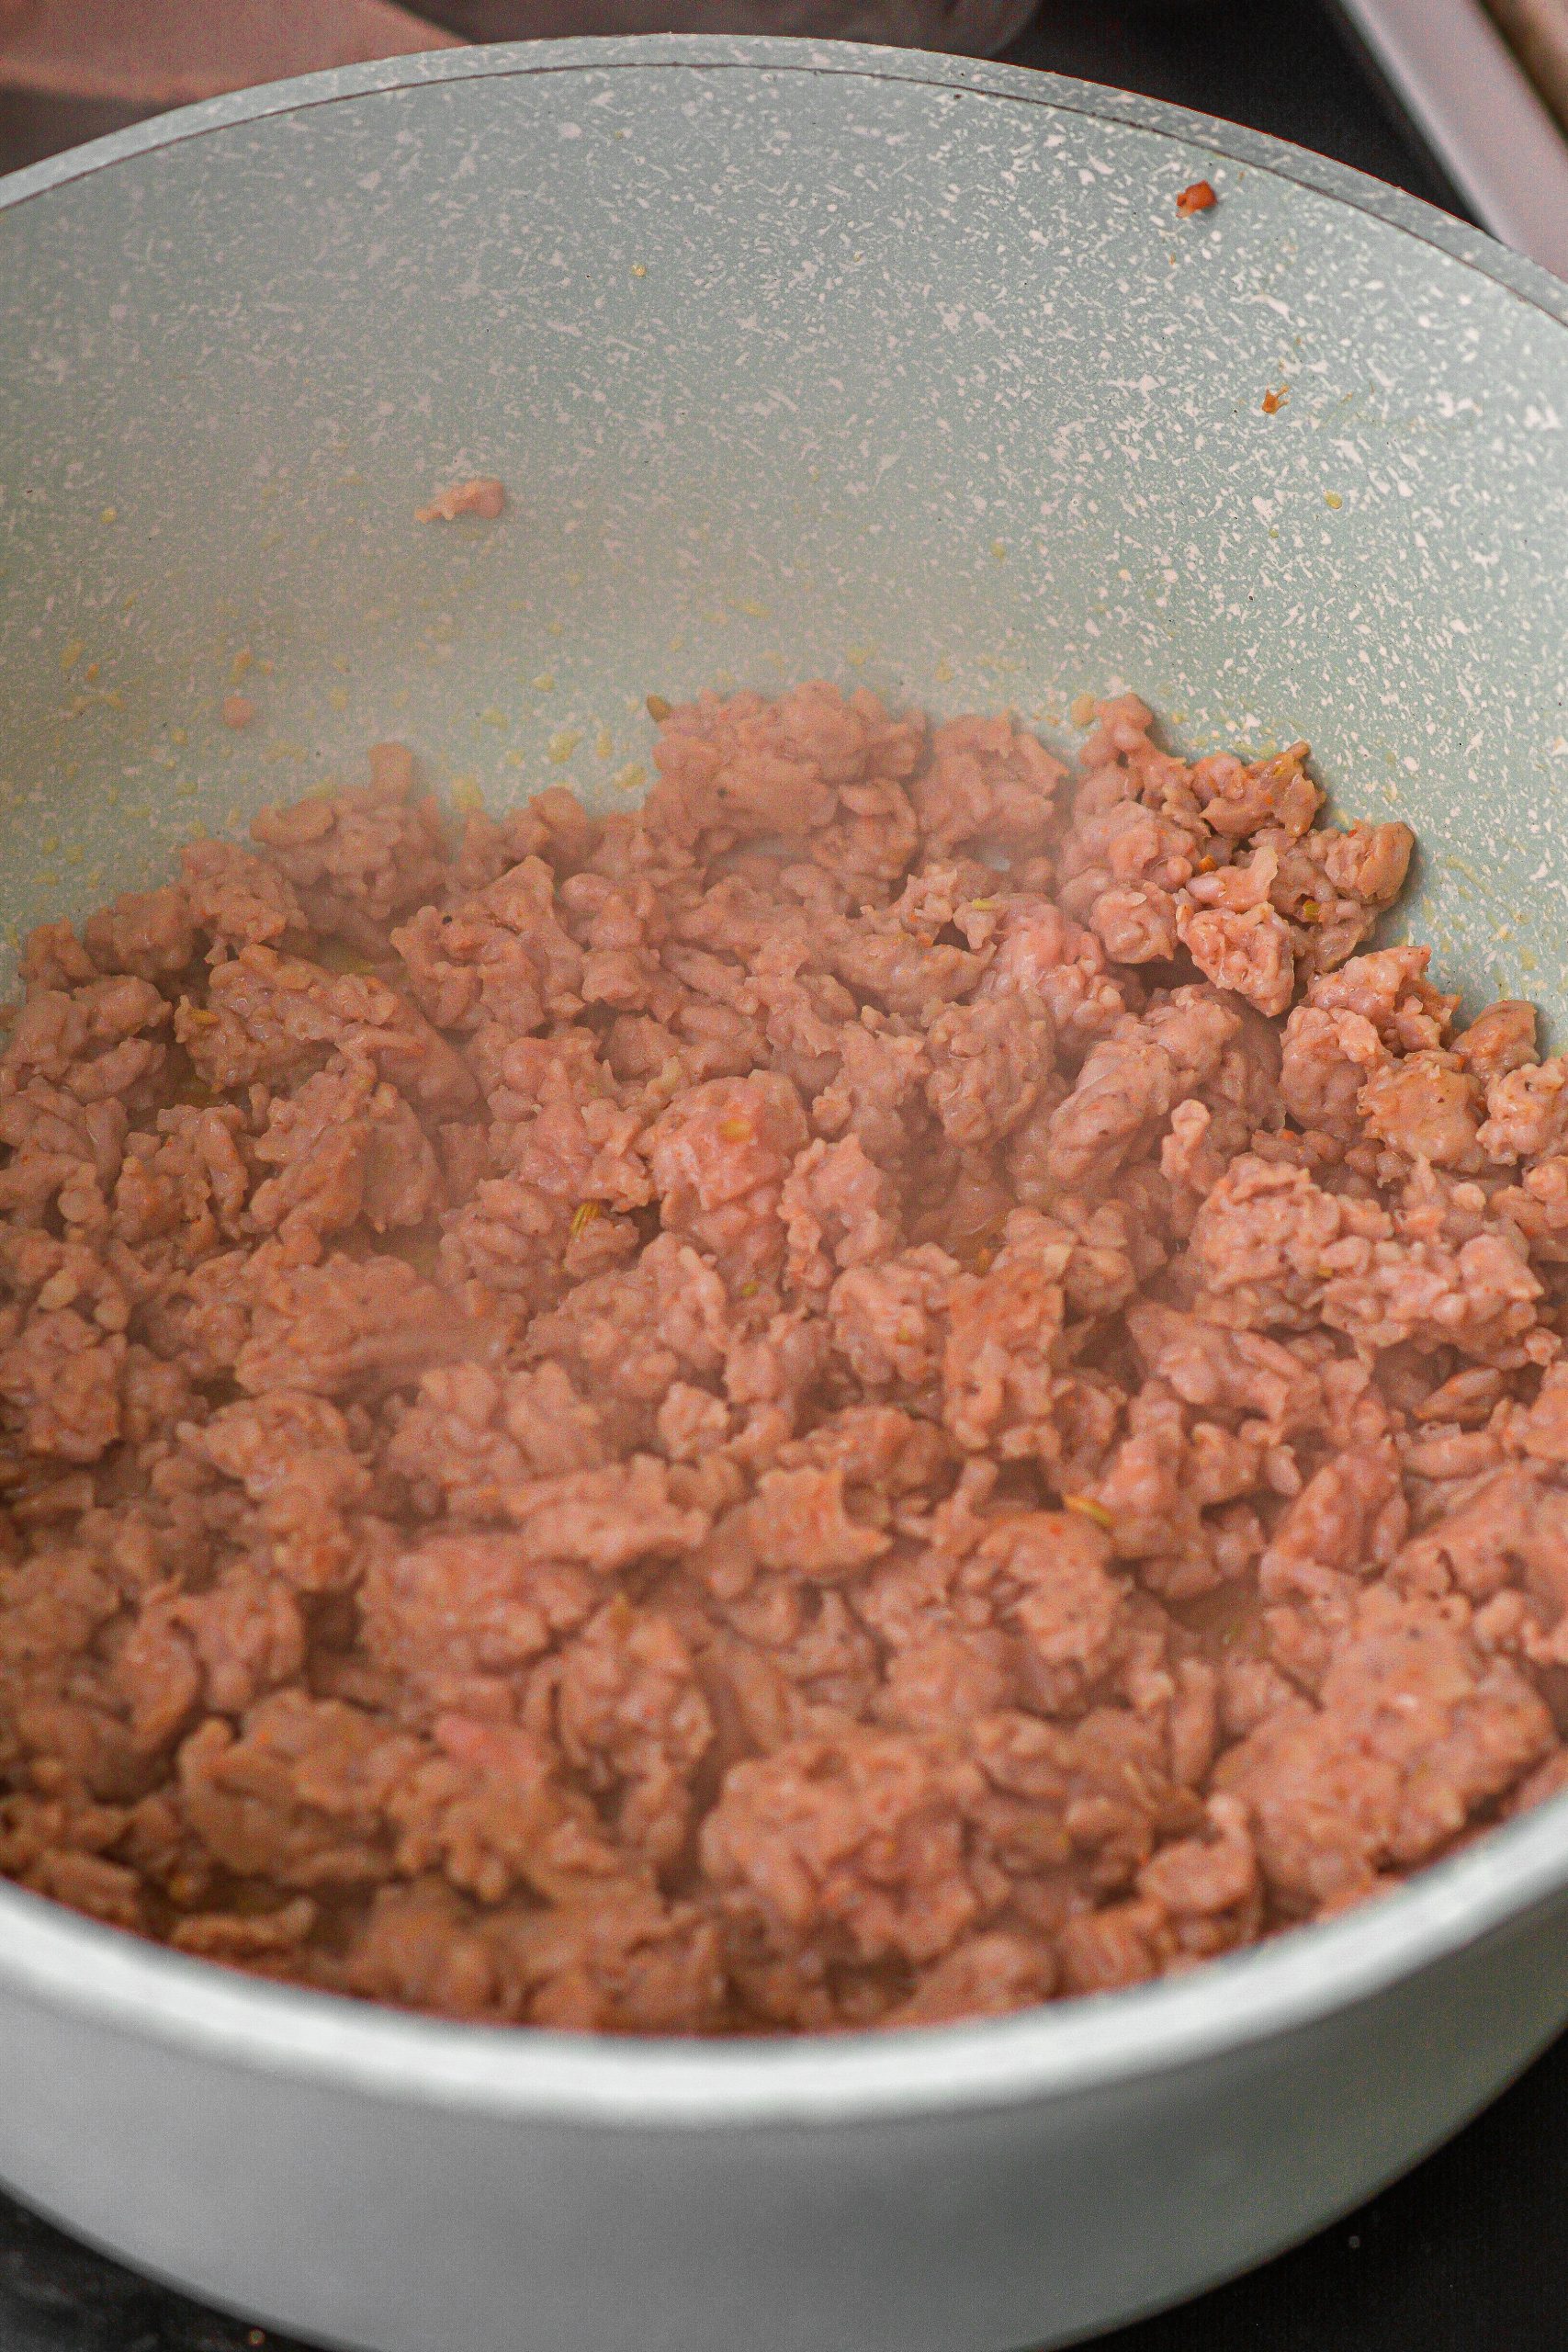 Place the ground beef into a pot, and saute until completely cooked through.